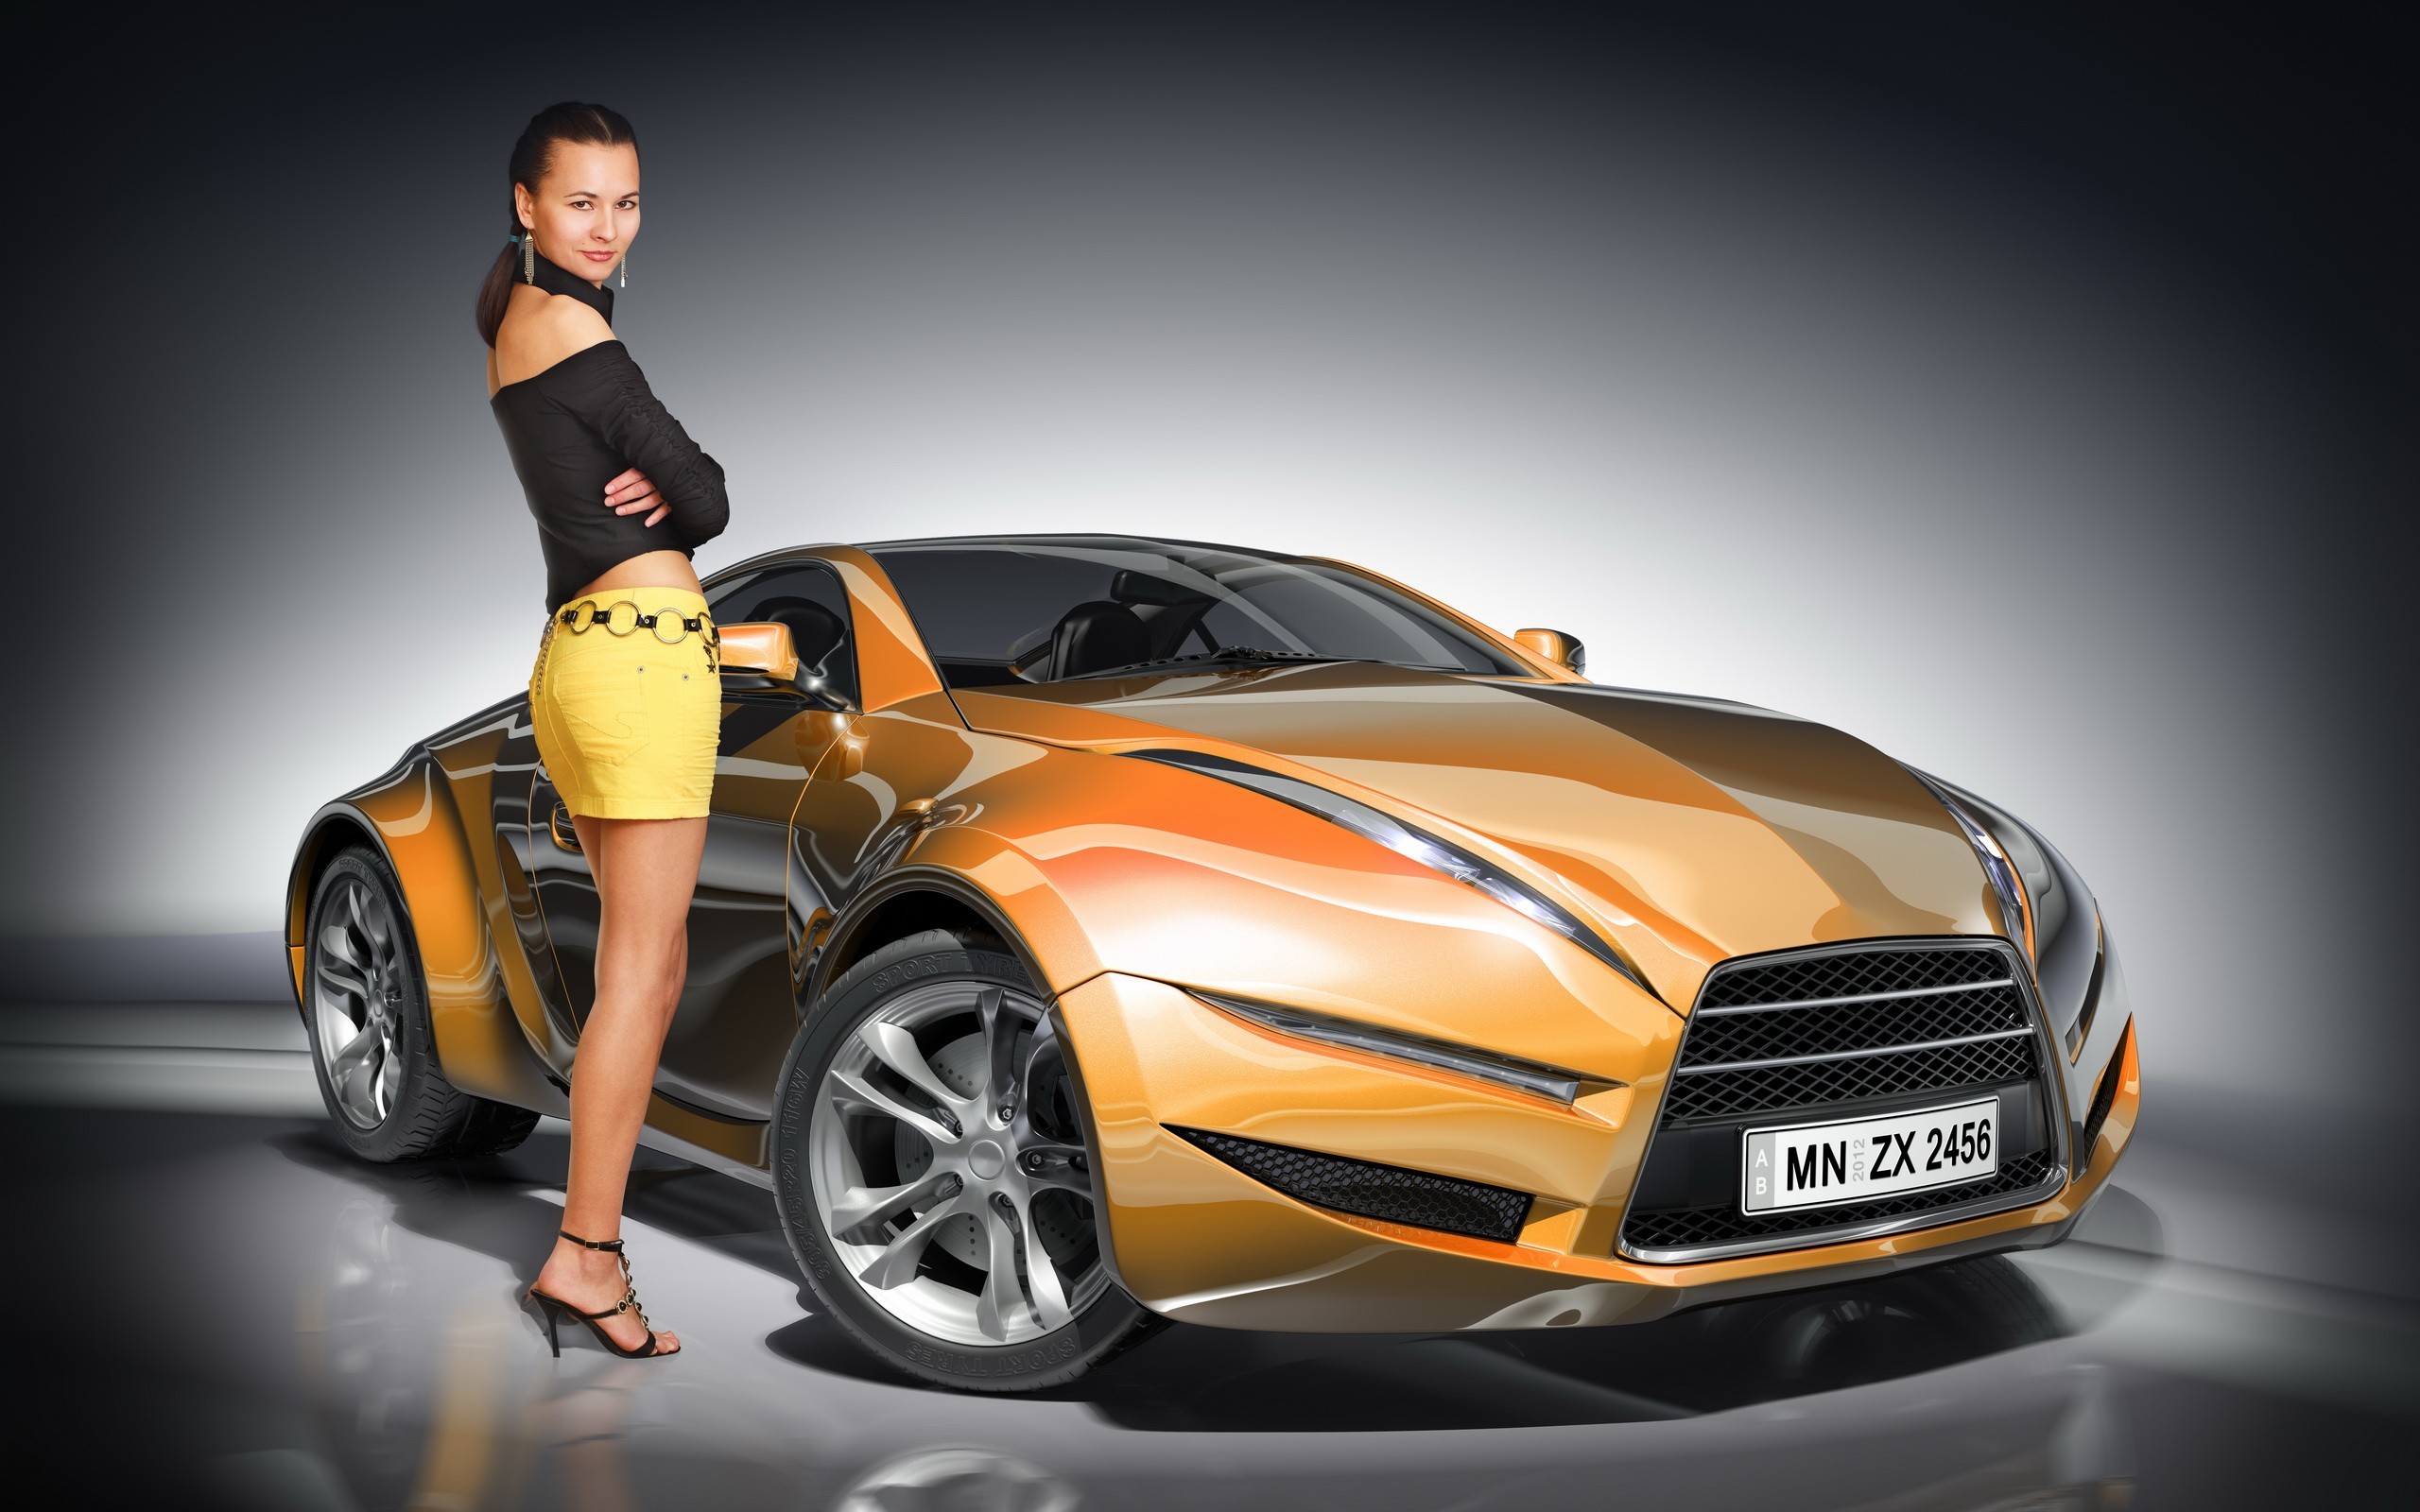 2560x1600 Car And Girl Wallpaper Nice Background